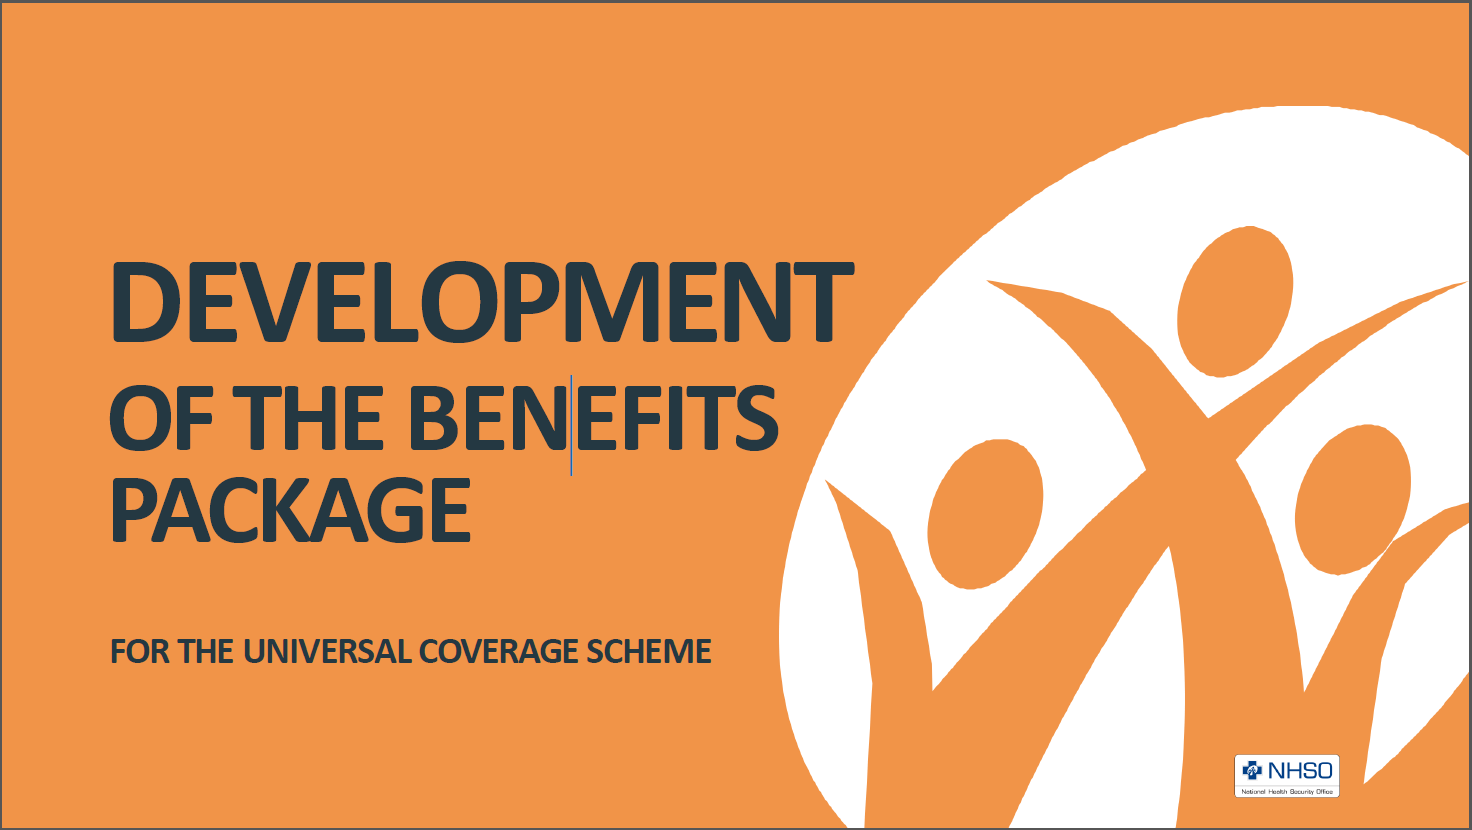 Development of the Benefits Package for the Universal Coverage Scheme